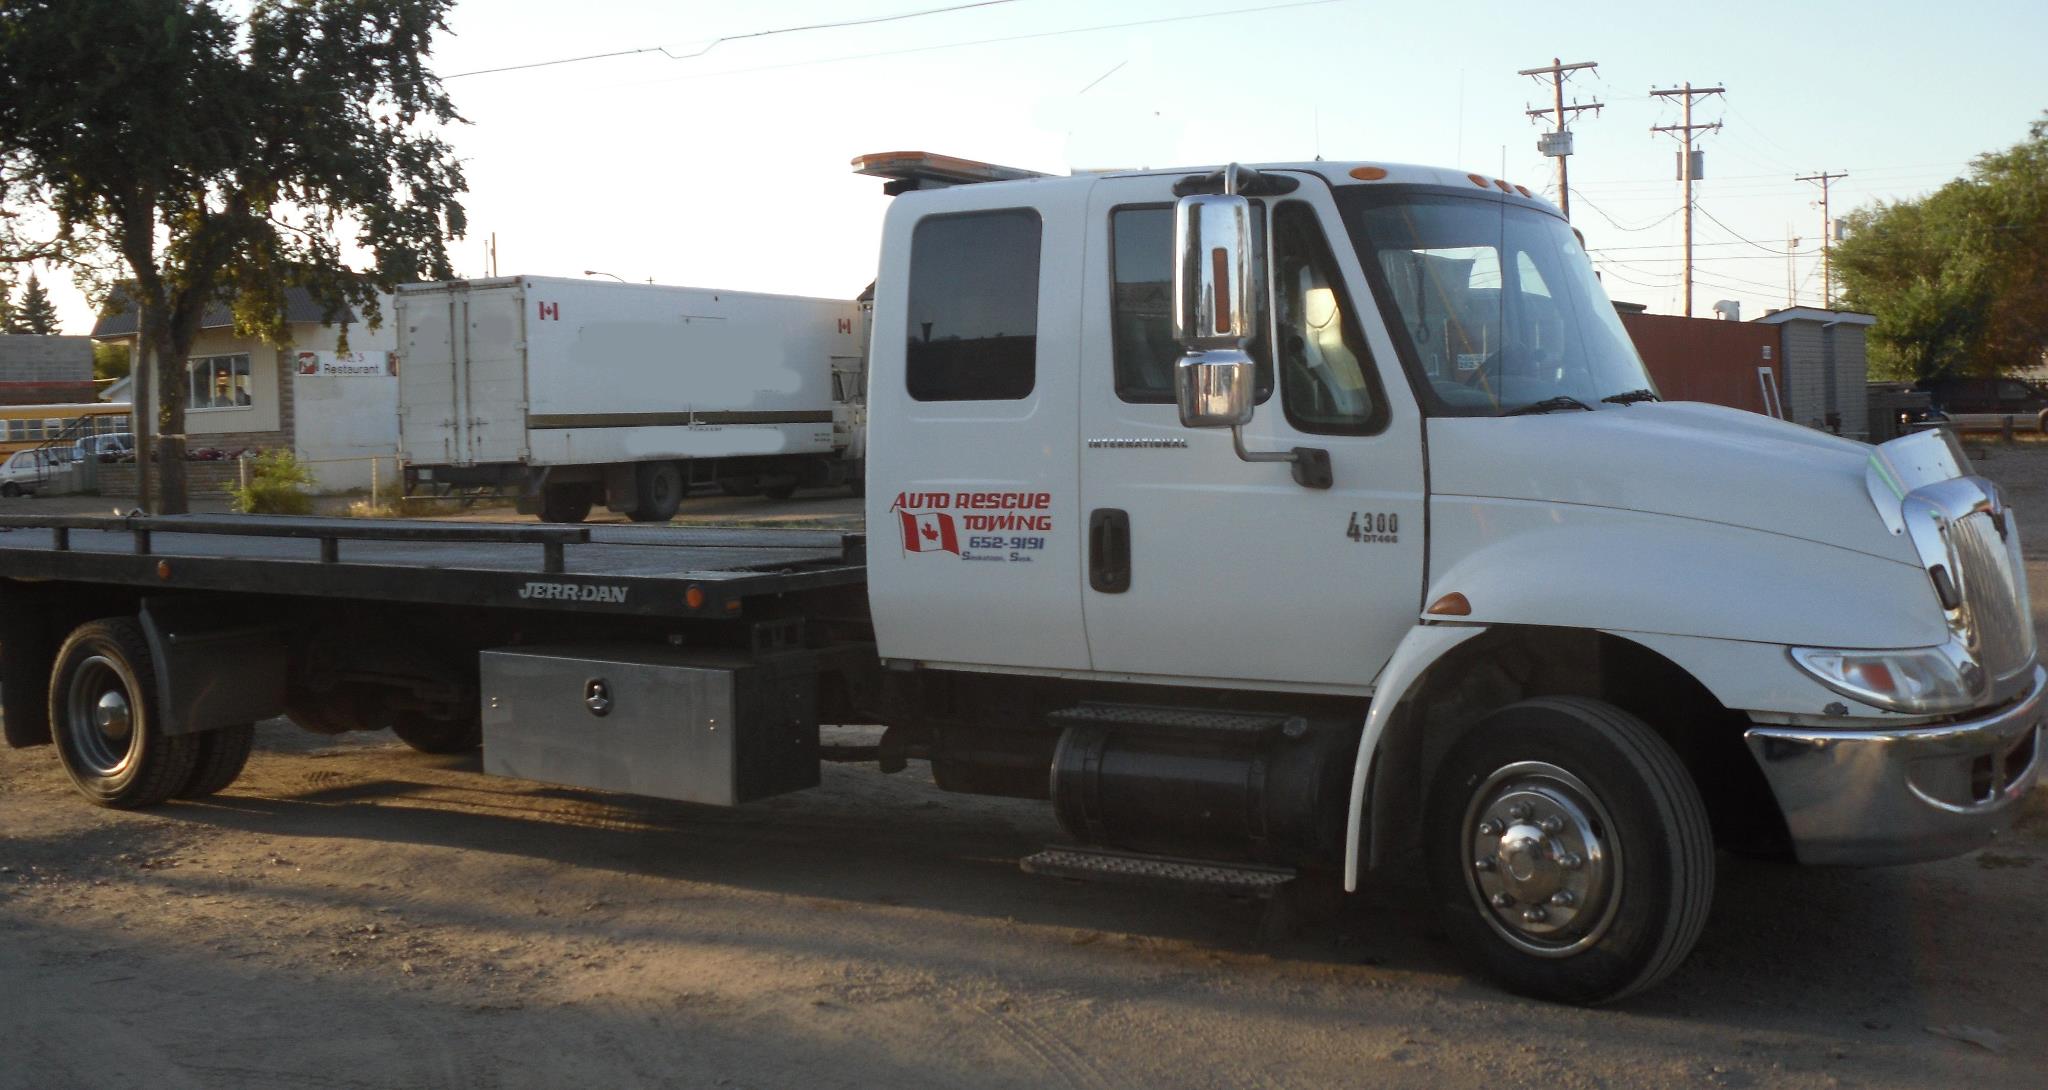 Auto Rescue Towing Flatbed Truck